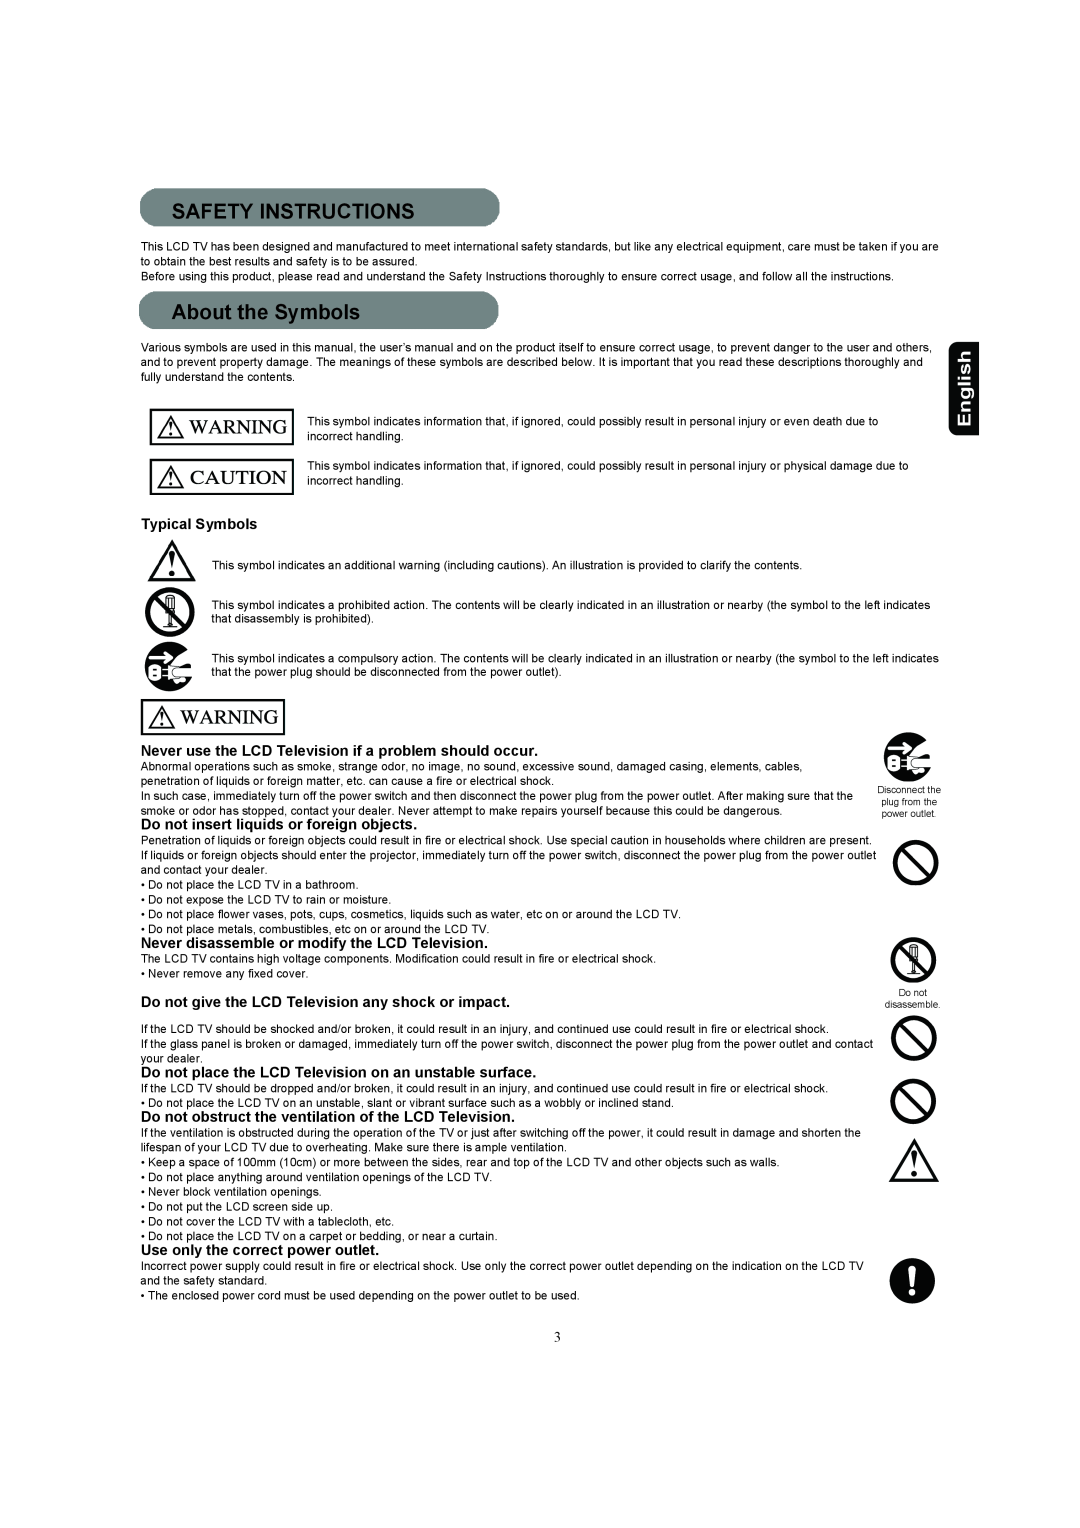 Hitachi 37HDL52A Safety Instructions, About the Symbols, English, Typical Symbols, Use only the correct power outlet 